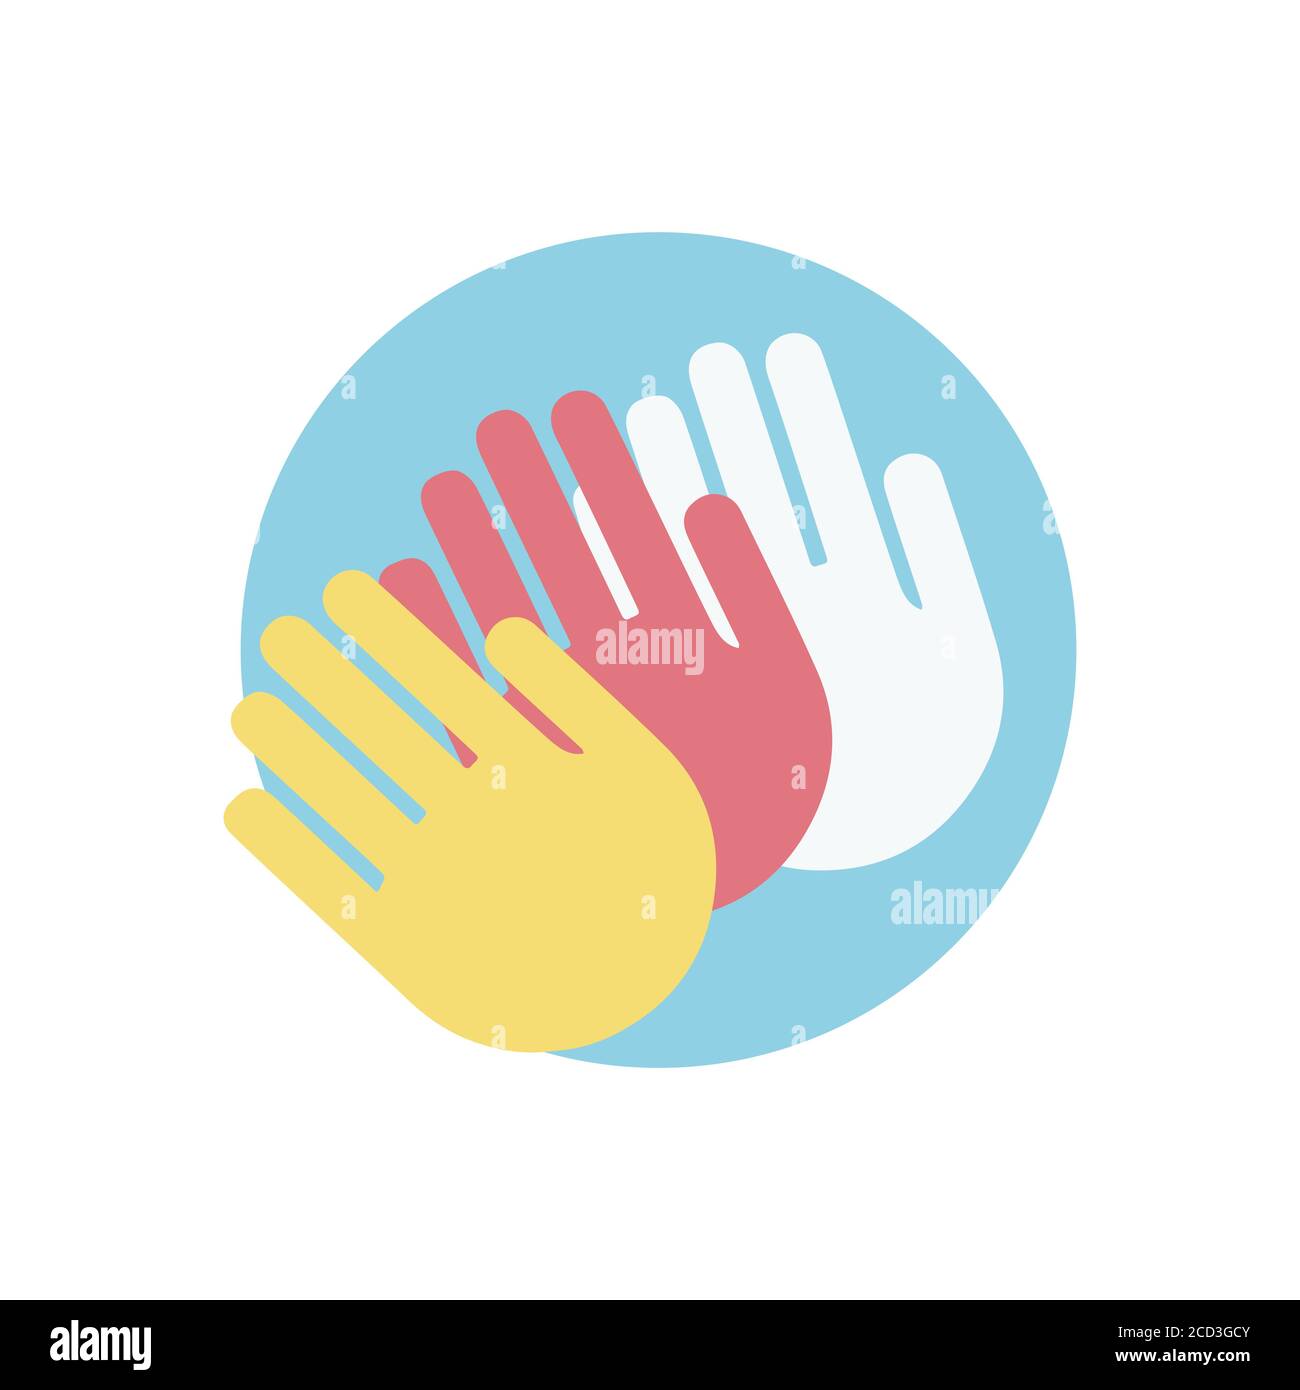 Social integration icon. Symbol of three hands of different color. Stock Vector